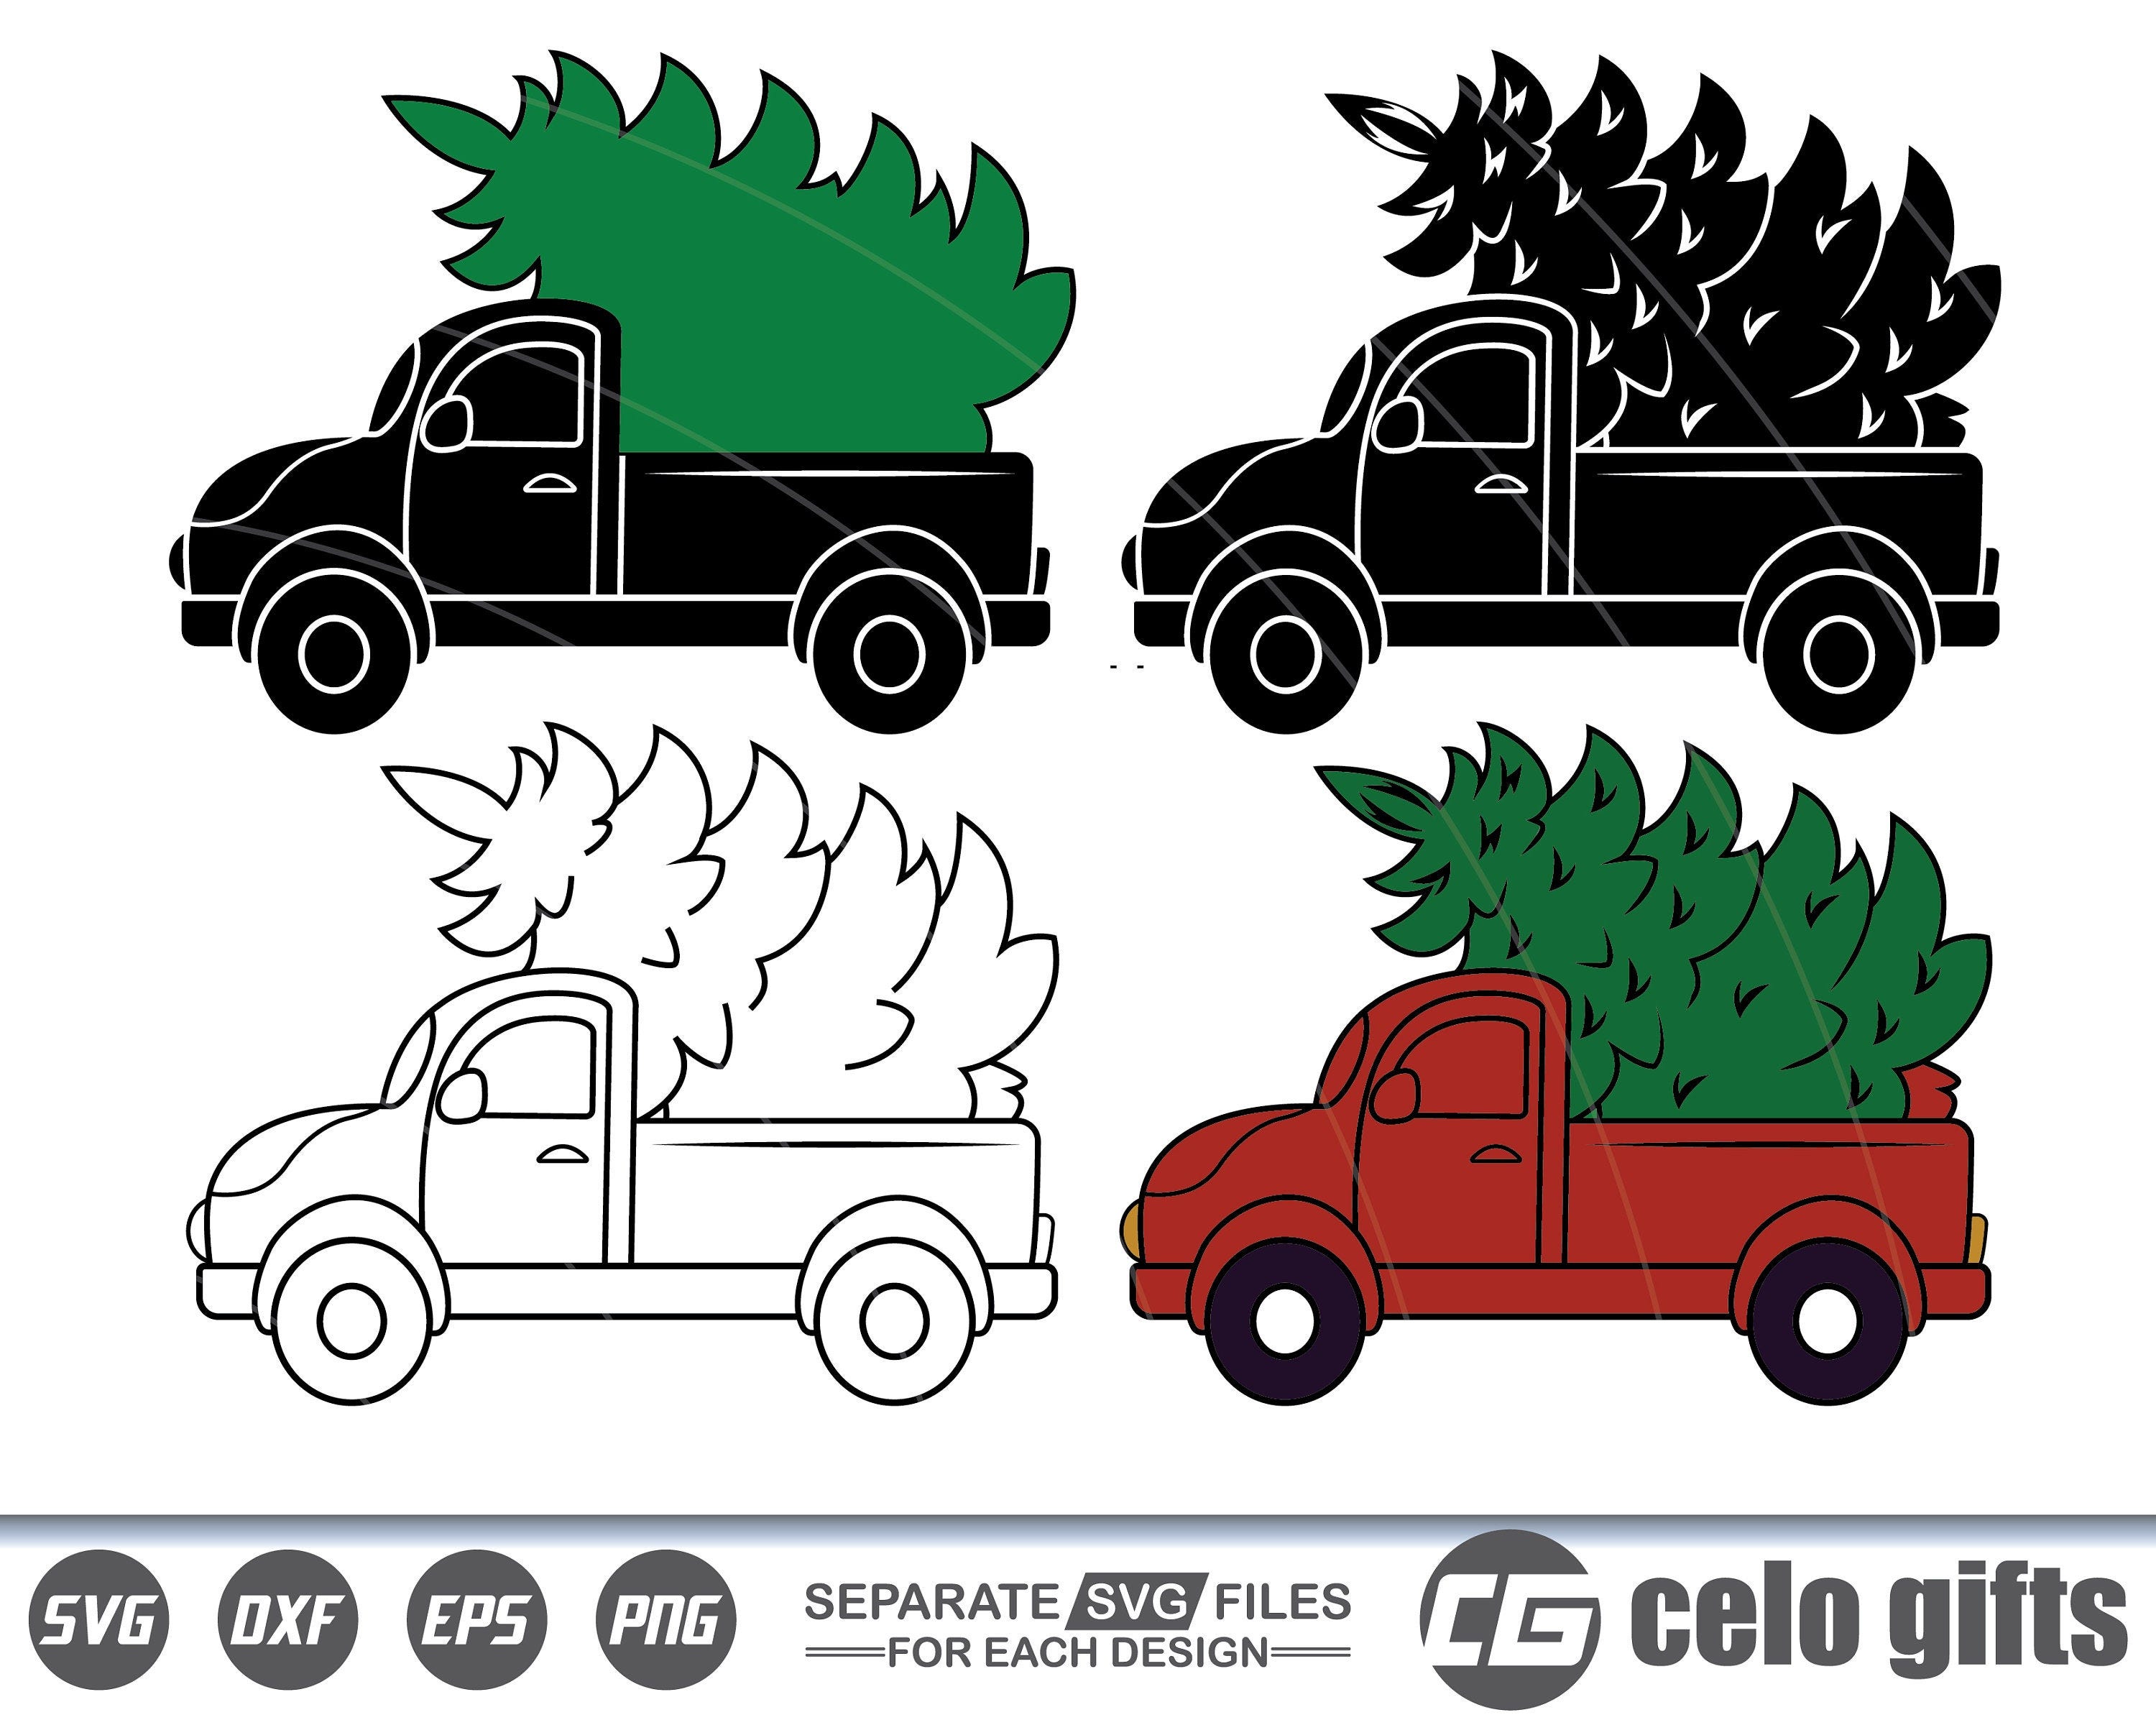 Christmas truck tree SVG, Christmas truck tree Vector, Cricut file, Clipart, Silhouette, Cuttable Design, Dxf, Png & Eps Designs.